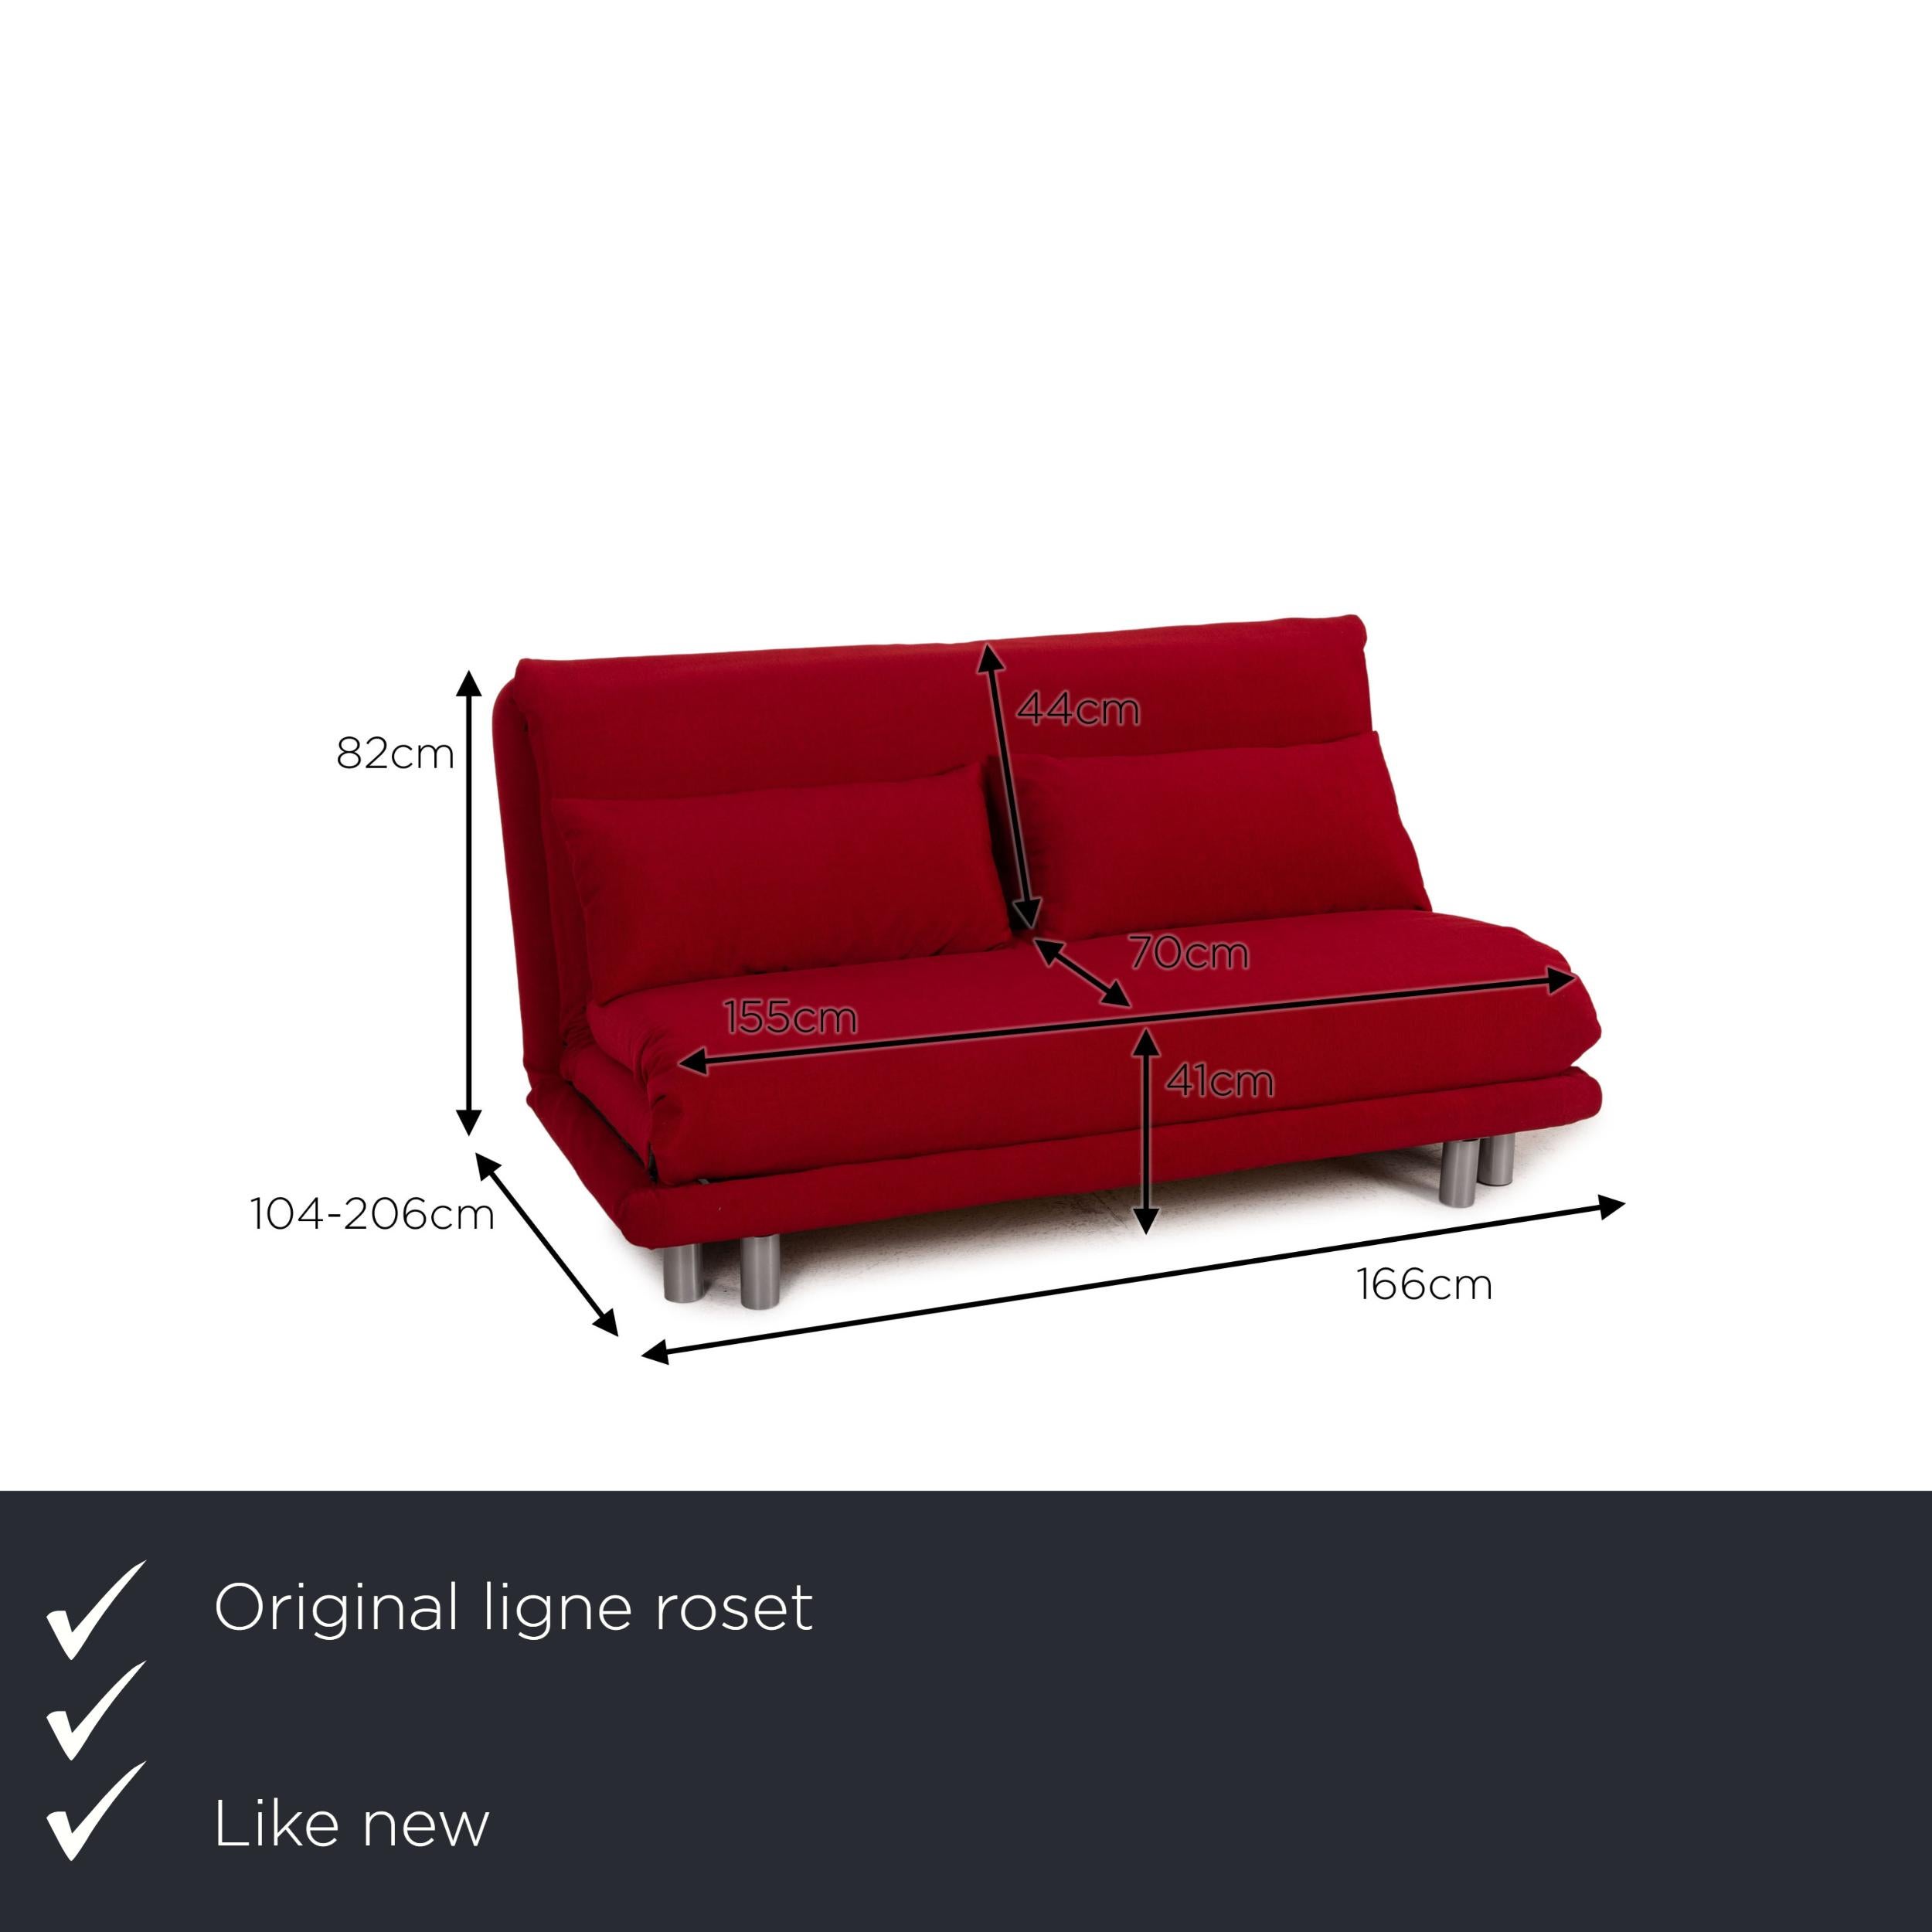 We present to you a Ligne Roset Multy fabric sofa Bordeaux two-seater couch function sleeping.


 Product measurements in centimeters:
 

Depth: 104
Width: 166
Height: 82
Seat height: 41
Rest height:
Seat depth: 70
Seat width: 155
Back